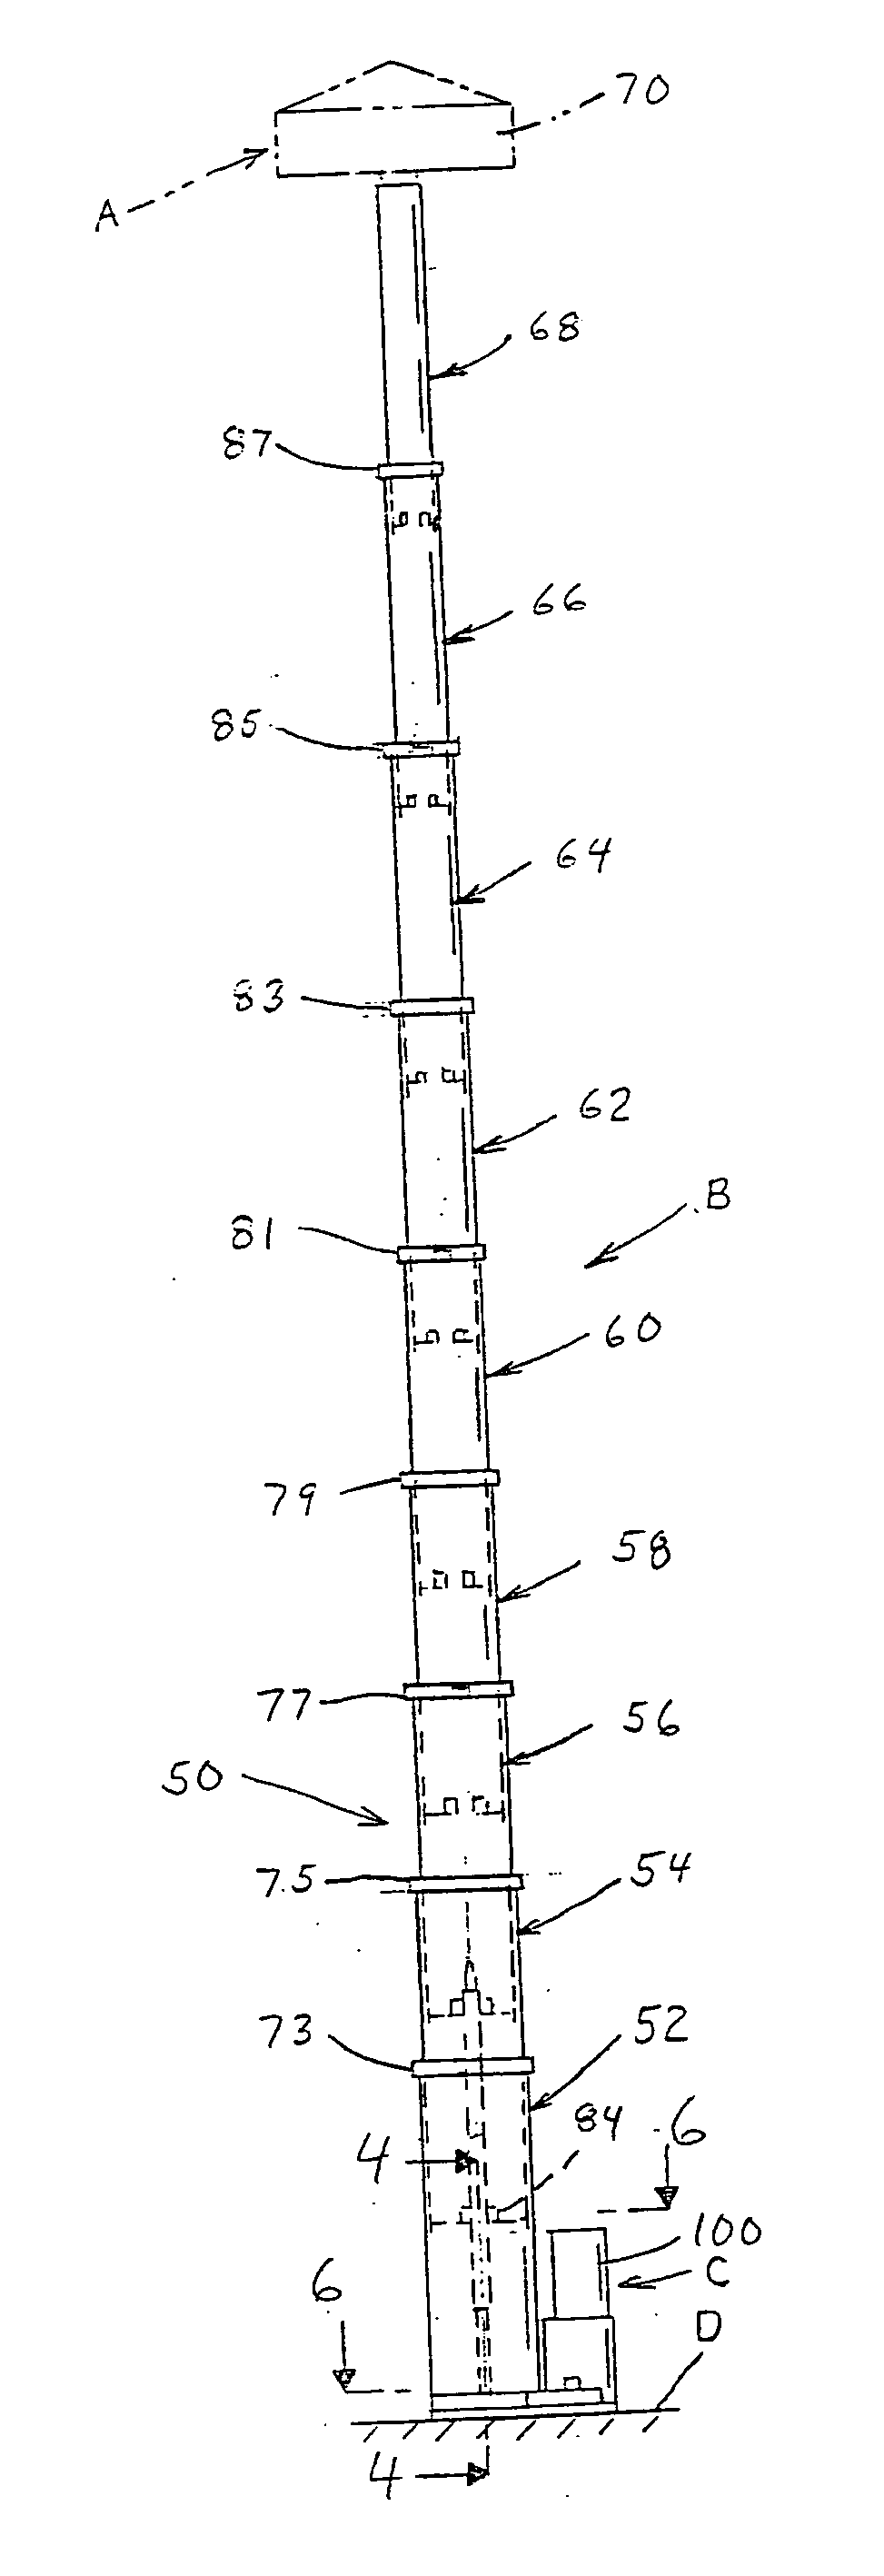 Support bearing assembly